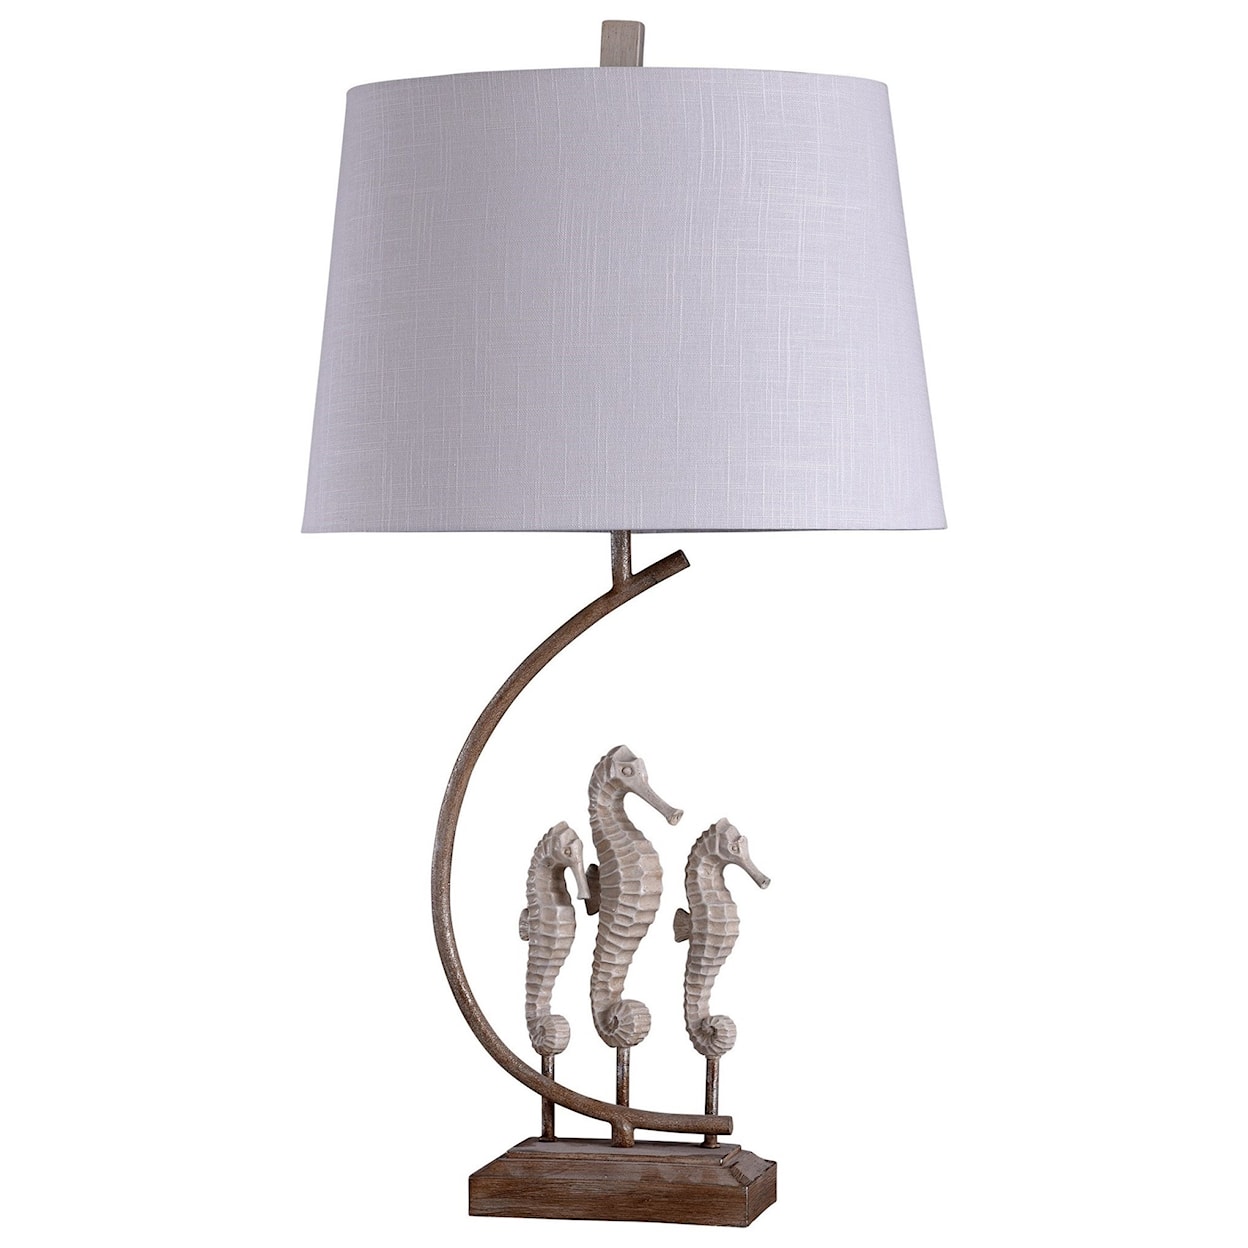 StyleCraft Lamps Oyster Bay Lamp